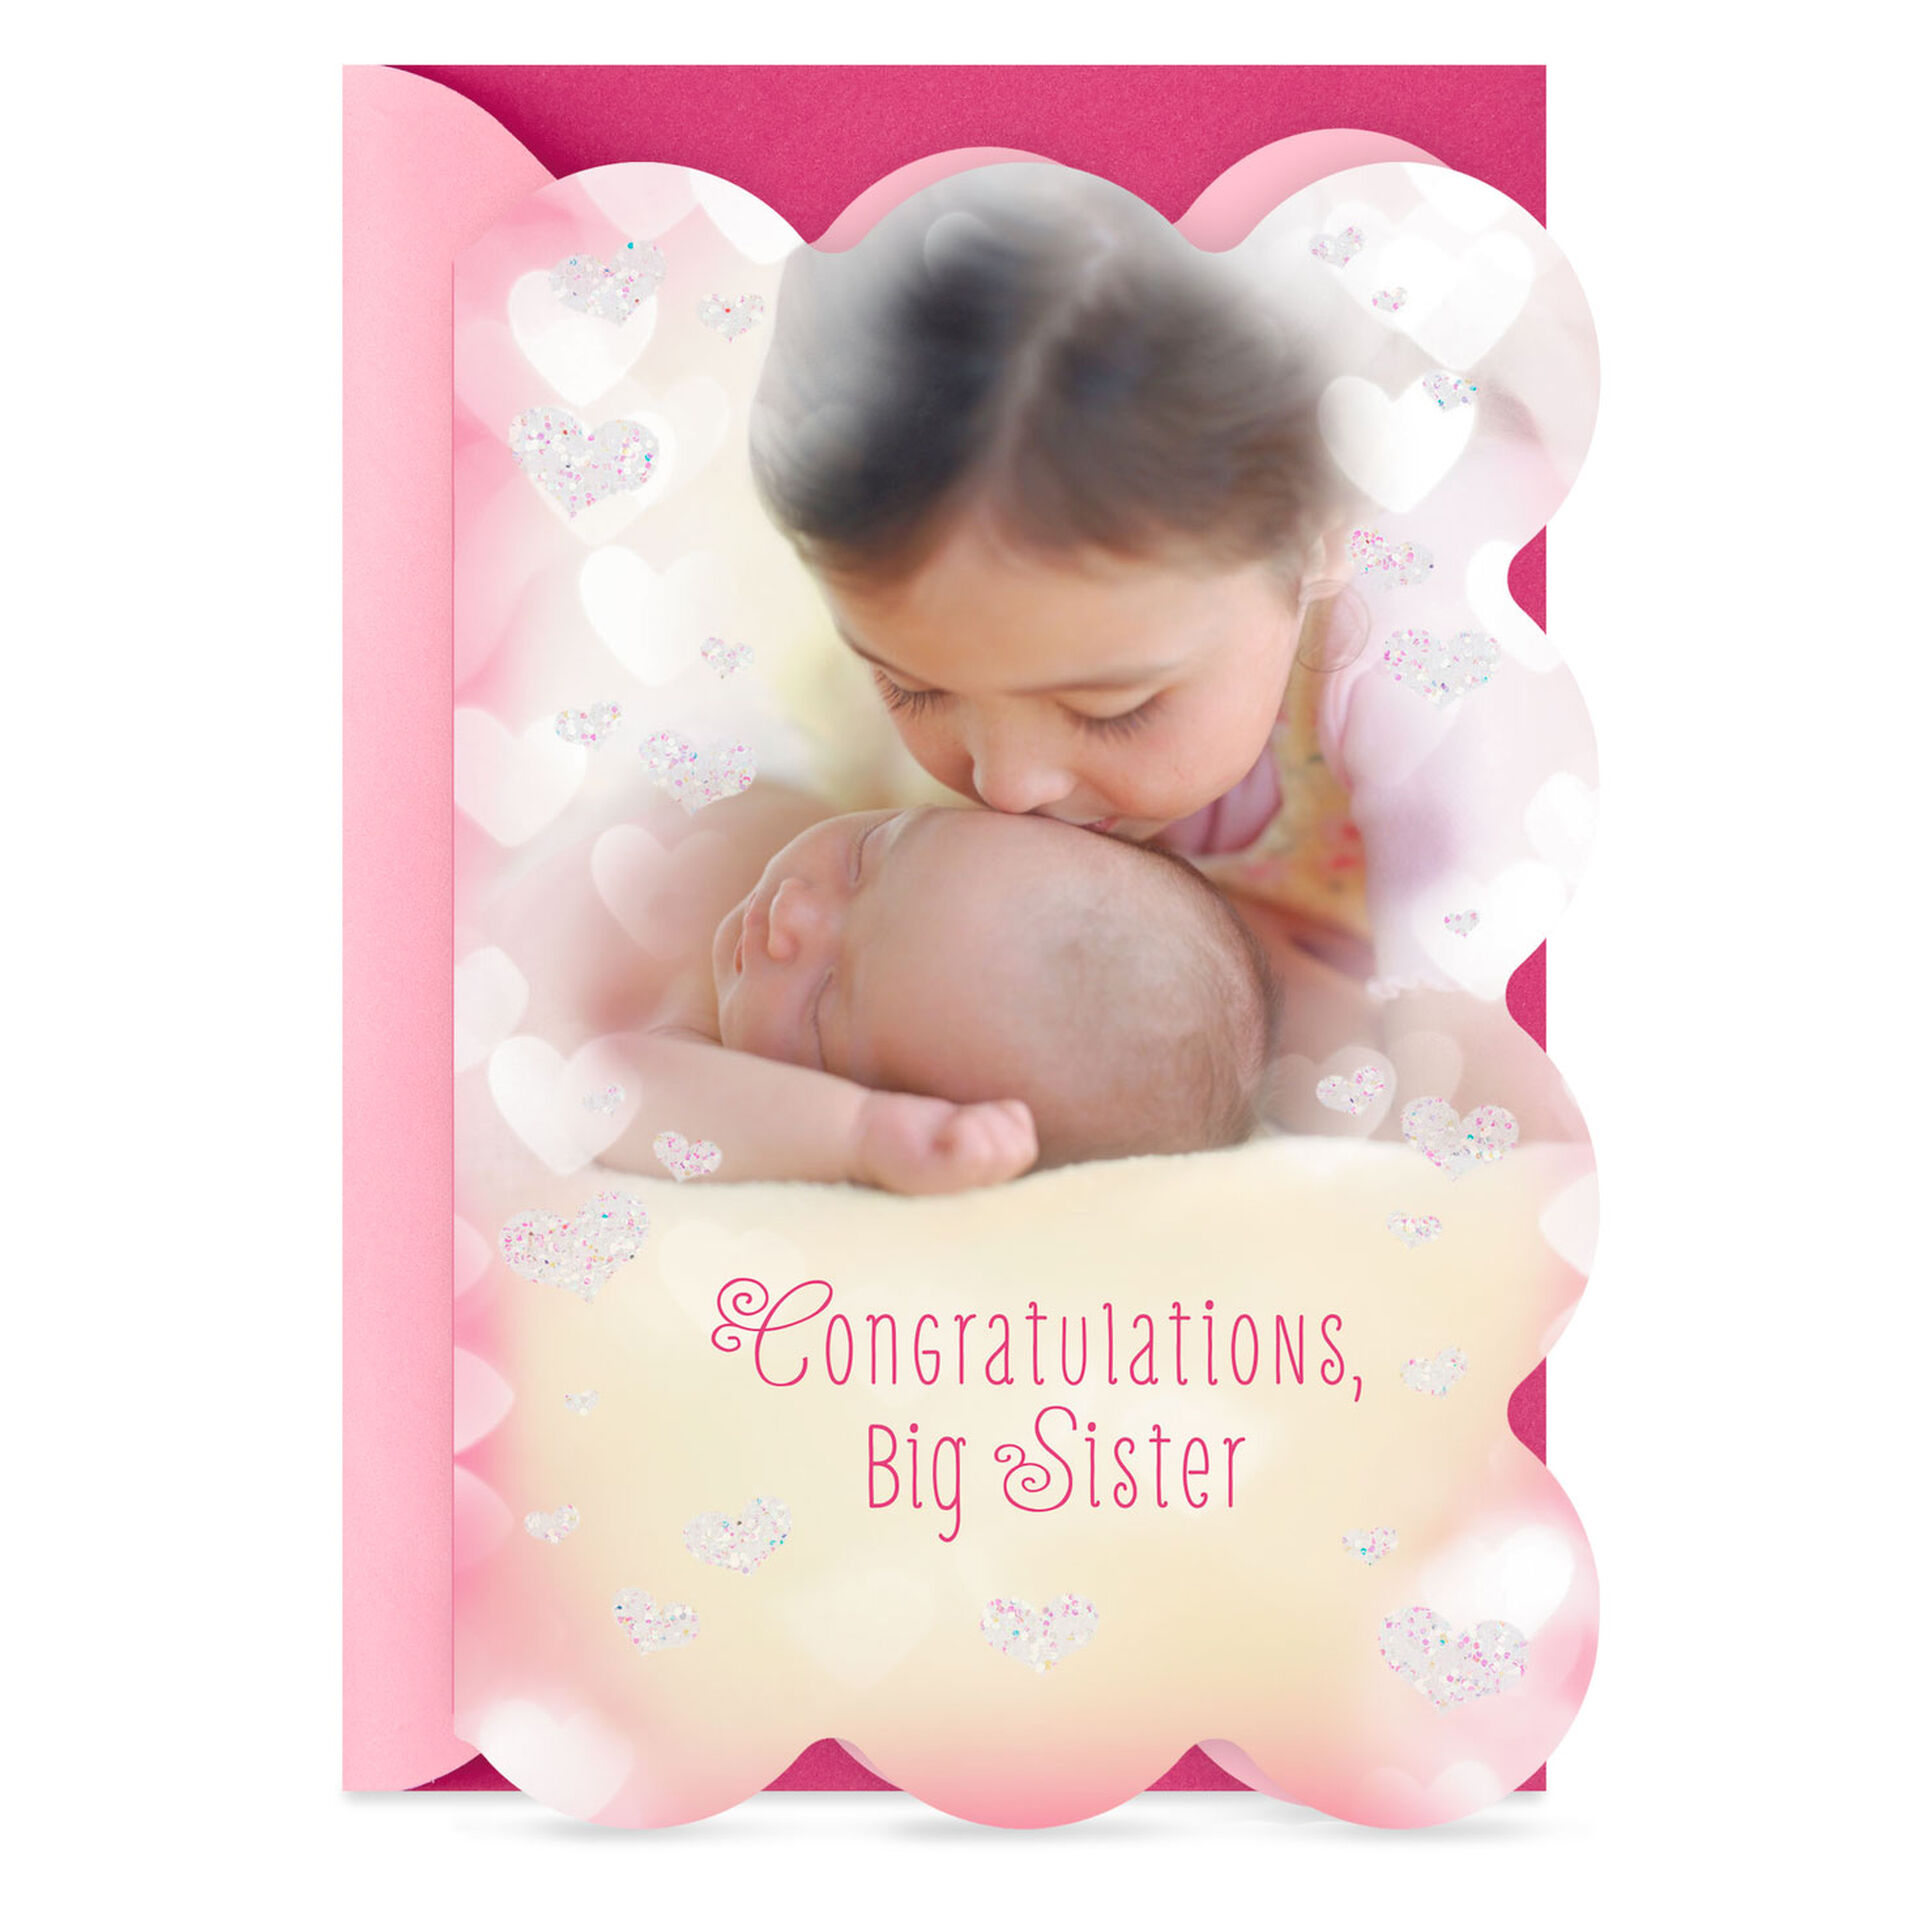 Big-Sister-Congratulations-Card-With-Girl-and-Baby_299G2425_01